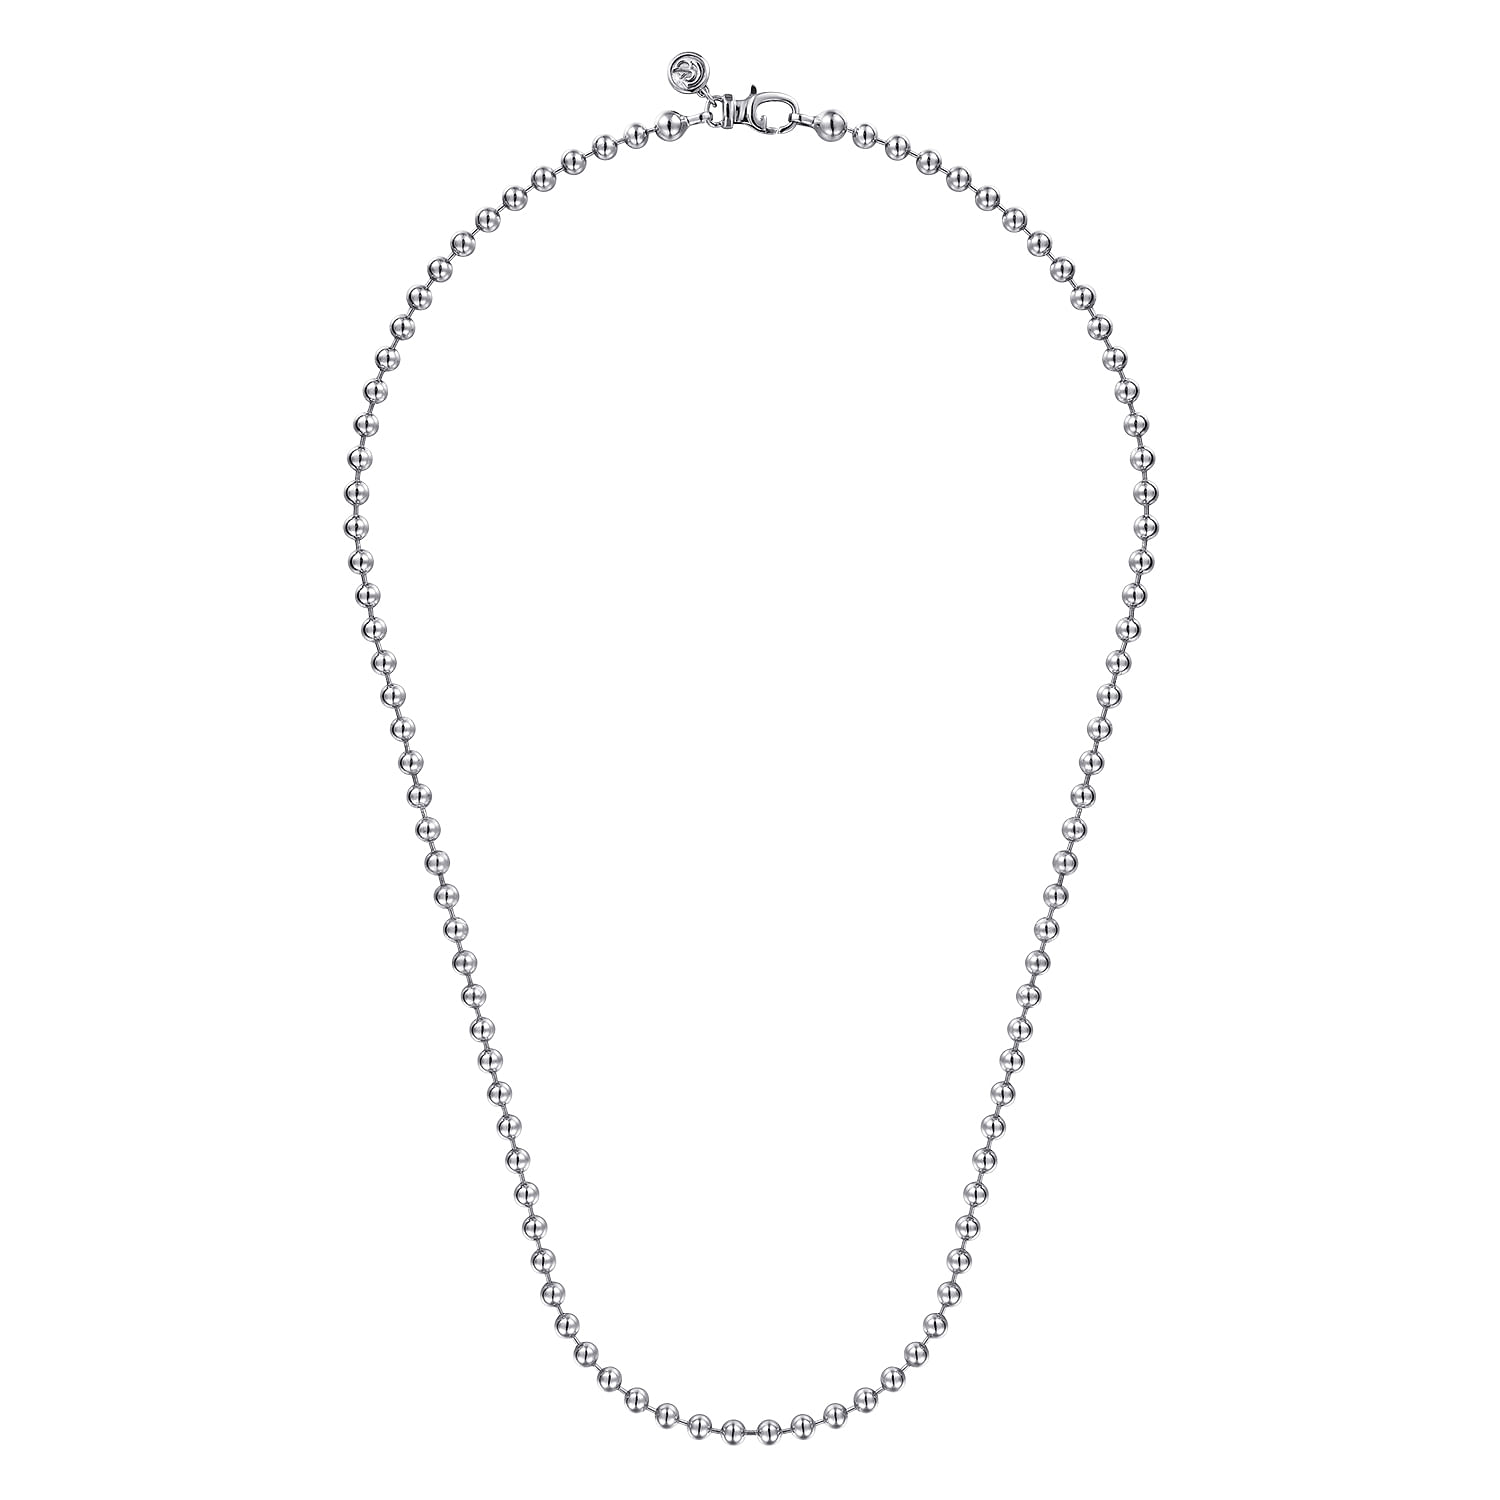 20 Inch 14K White Gold  4mm Ball Chain Necklace